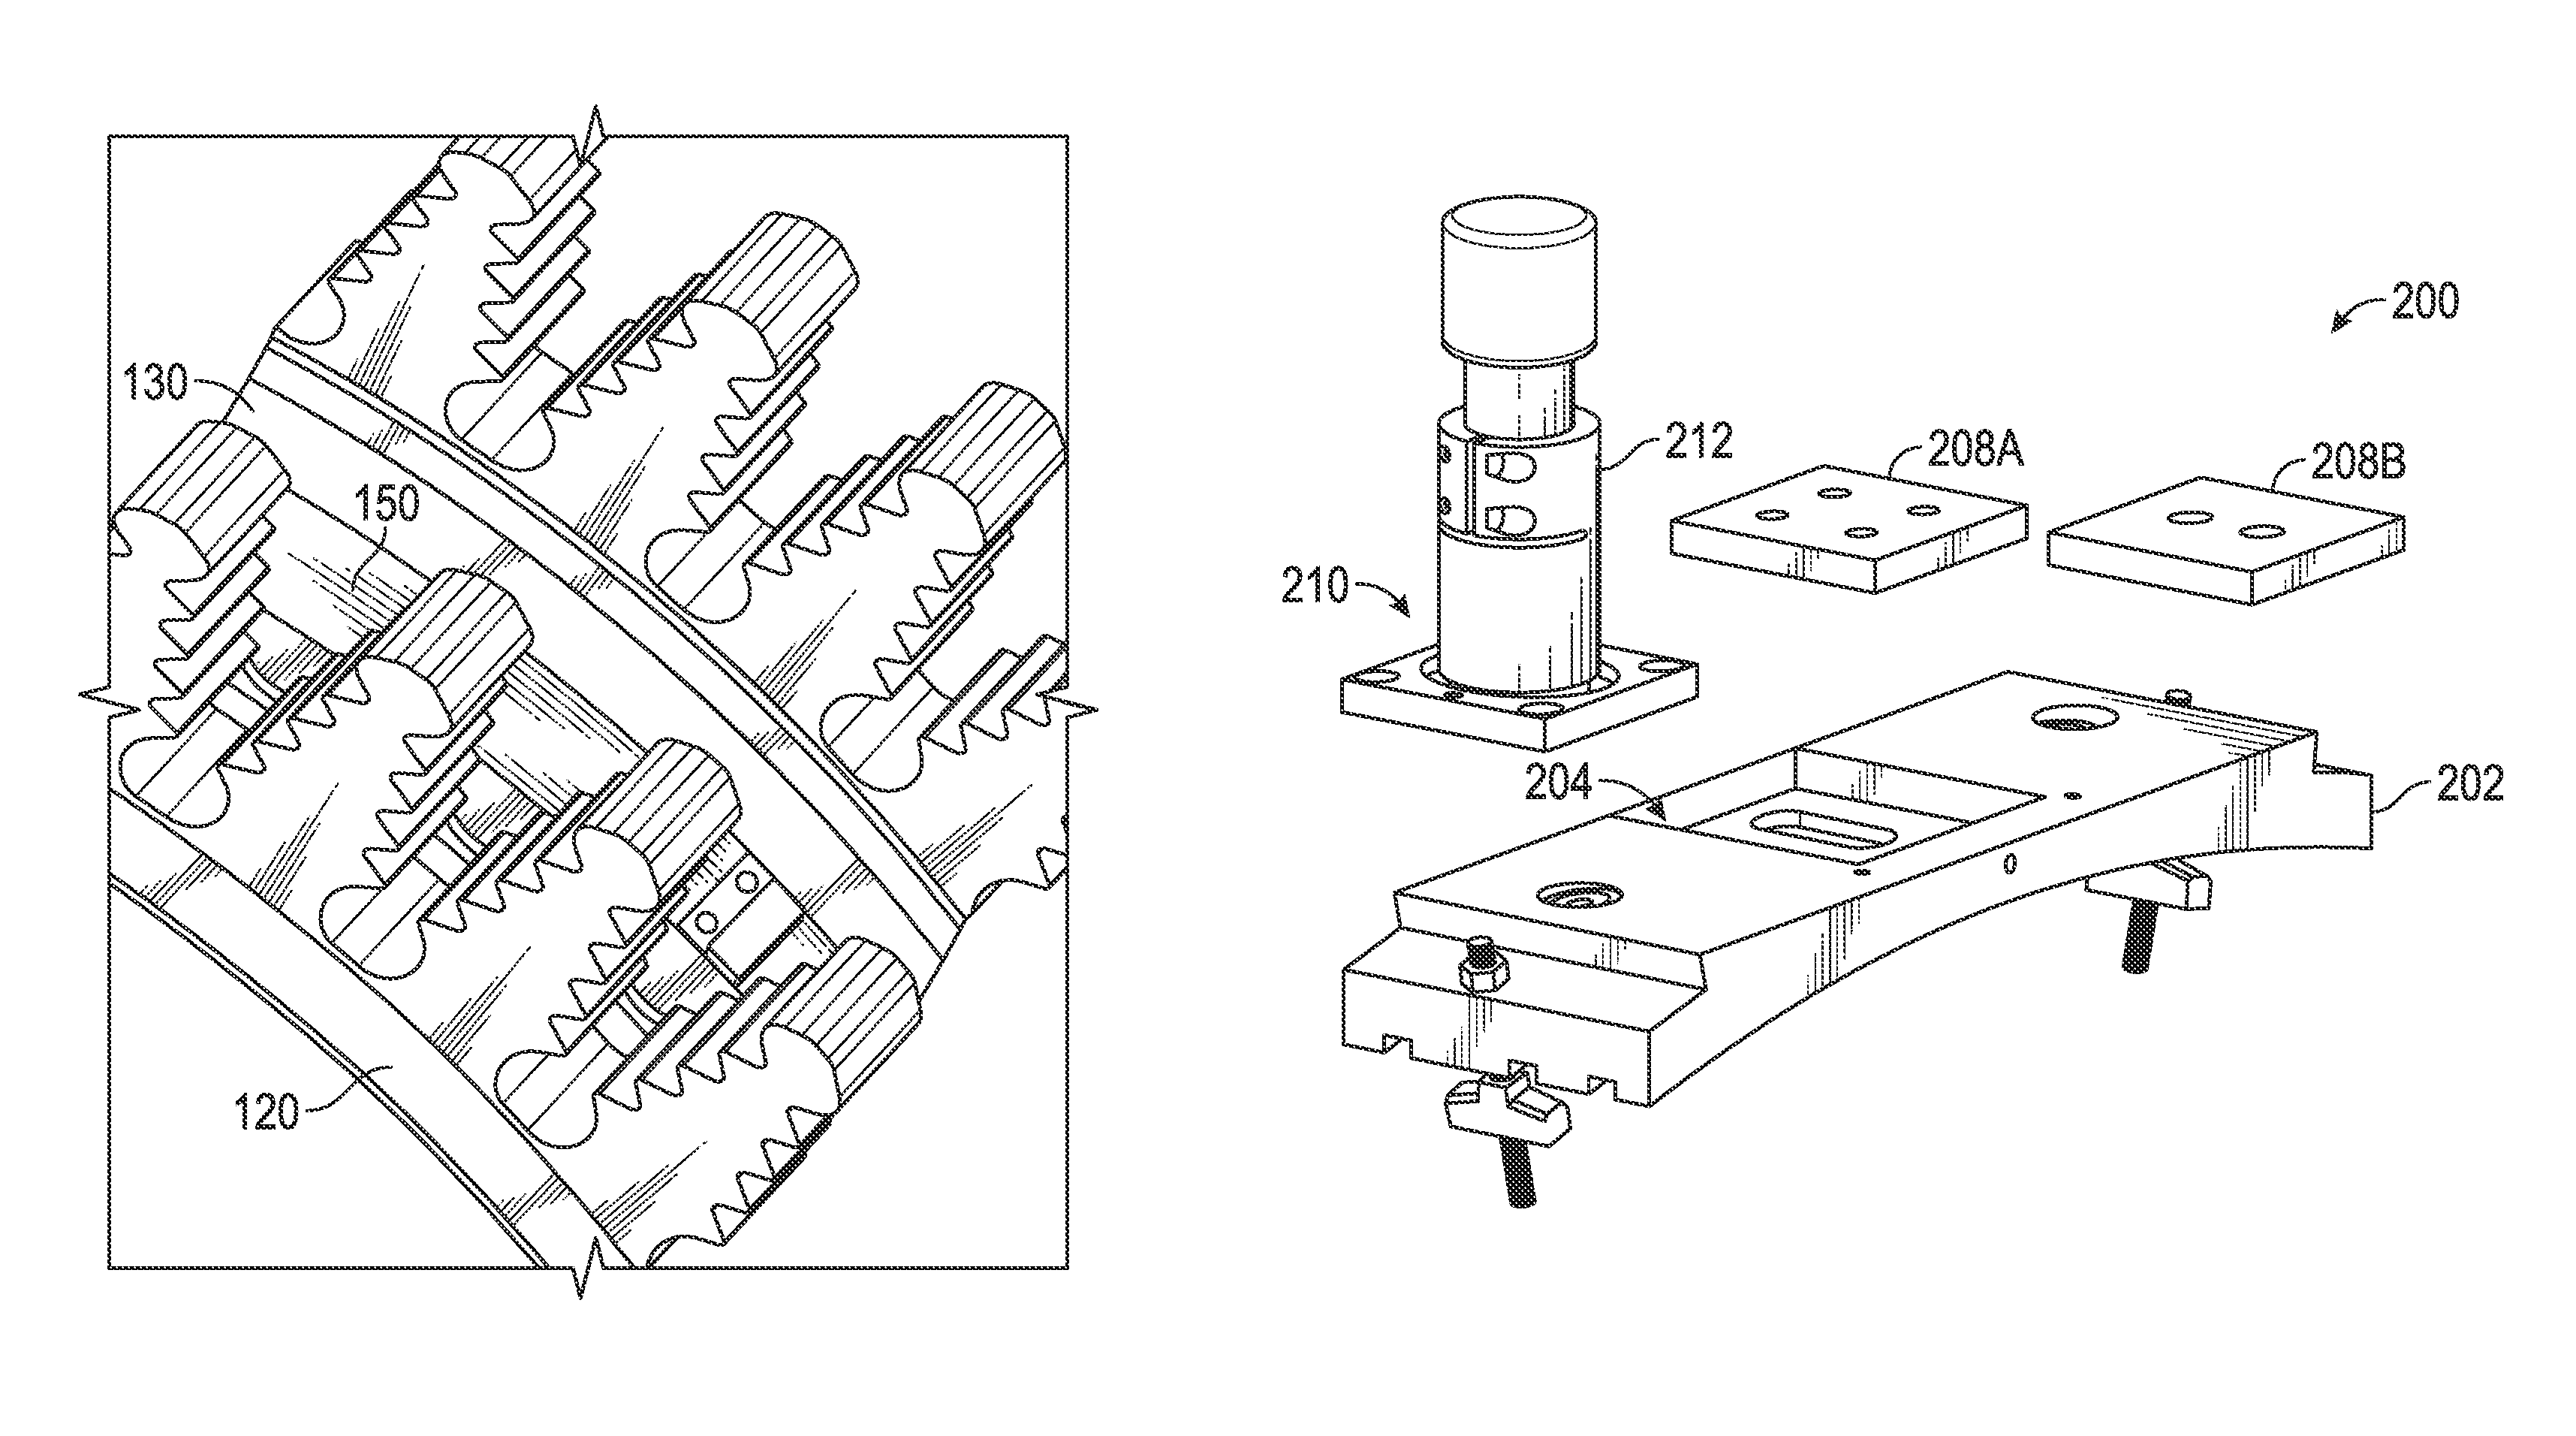 Method and apparatus for improved turbine bellyband rotor seal machining, installation and life